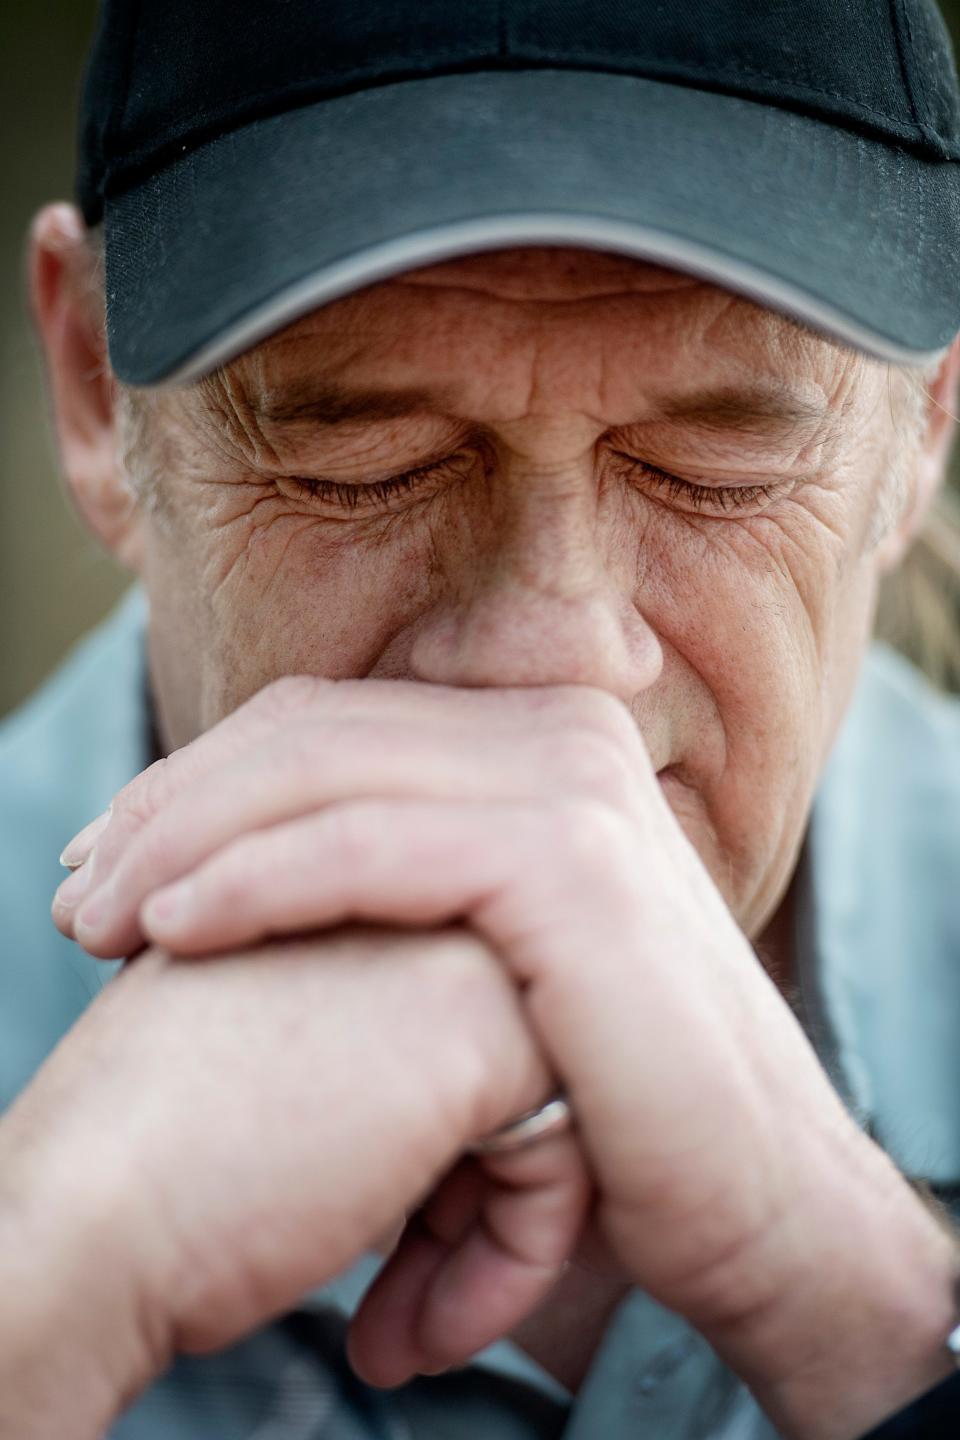 Eric Hall closes his eyes as he thinks back to what year he became homeless March 30, 2022 in East Asheville. Hall concluded it was 2020 when he found himself without housing.